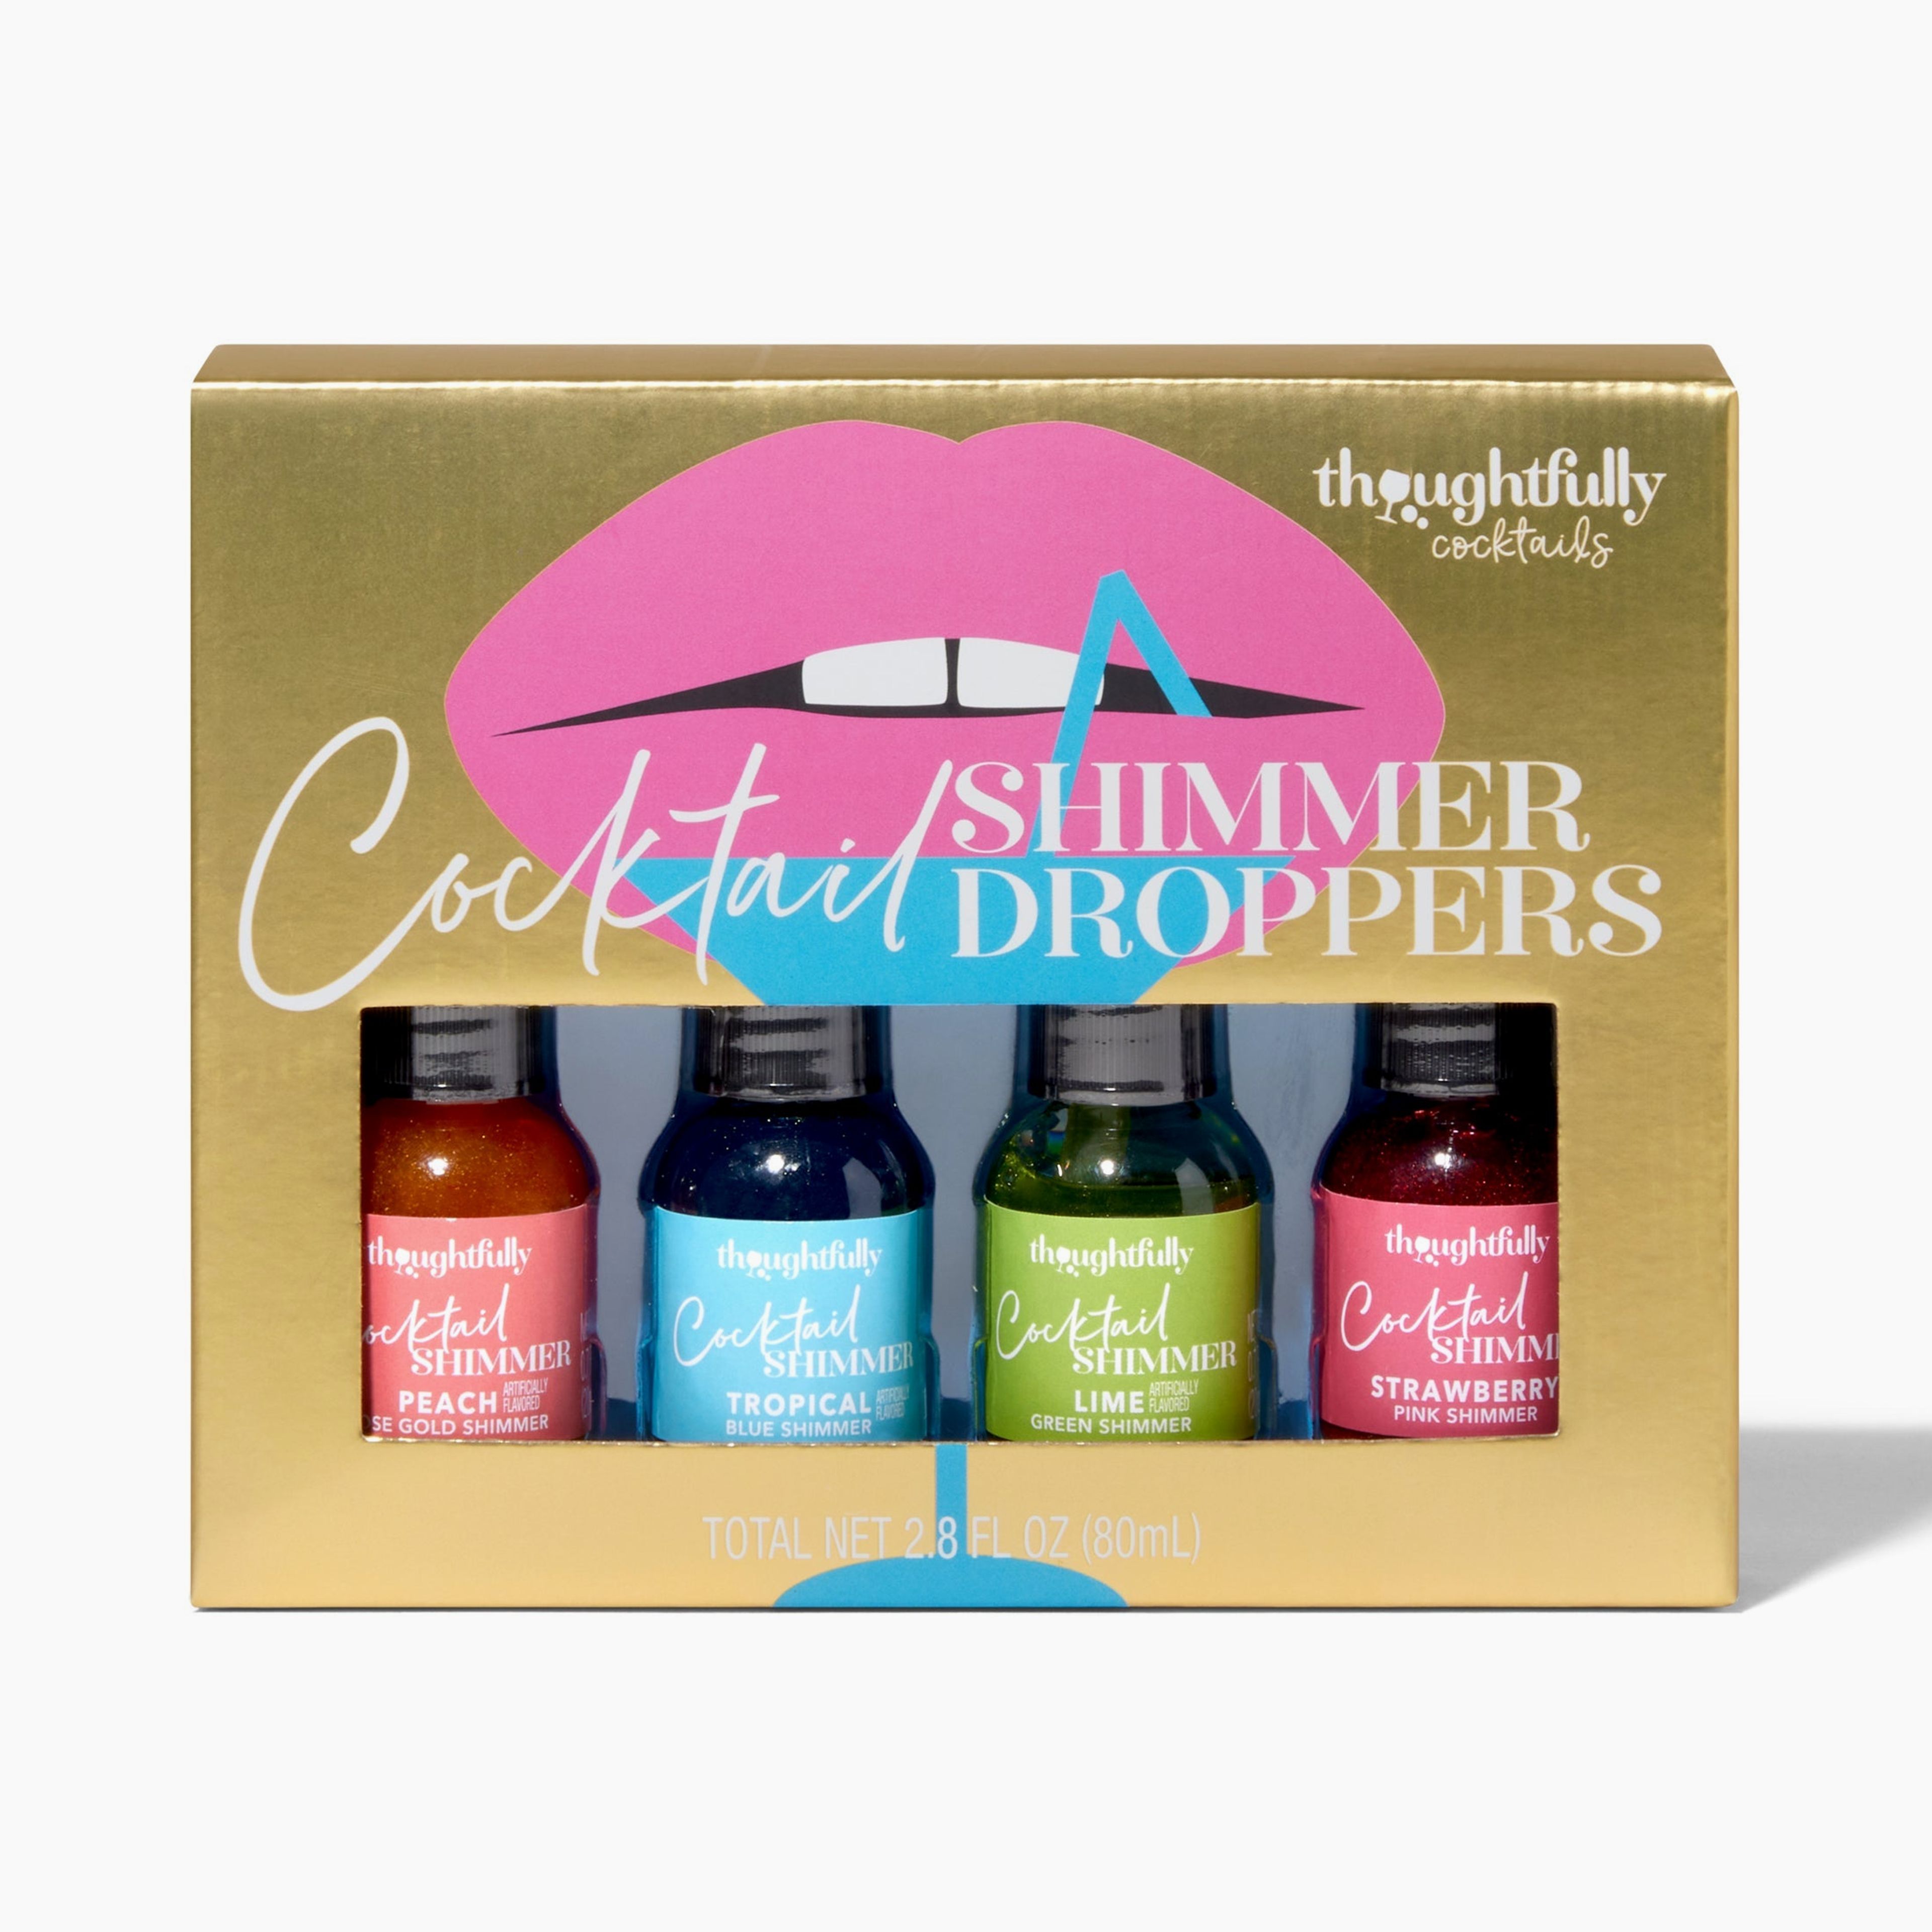 Cocktail Shimmer Droppers, Edible Glitter Set of 4